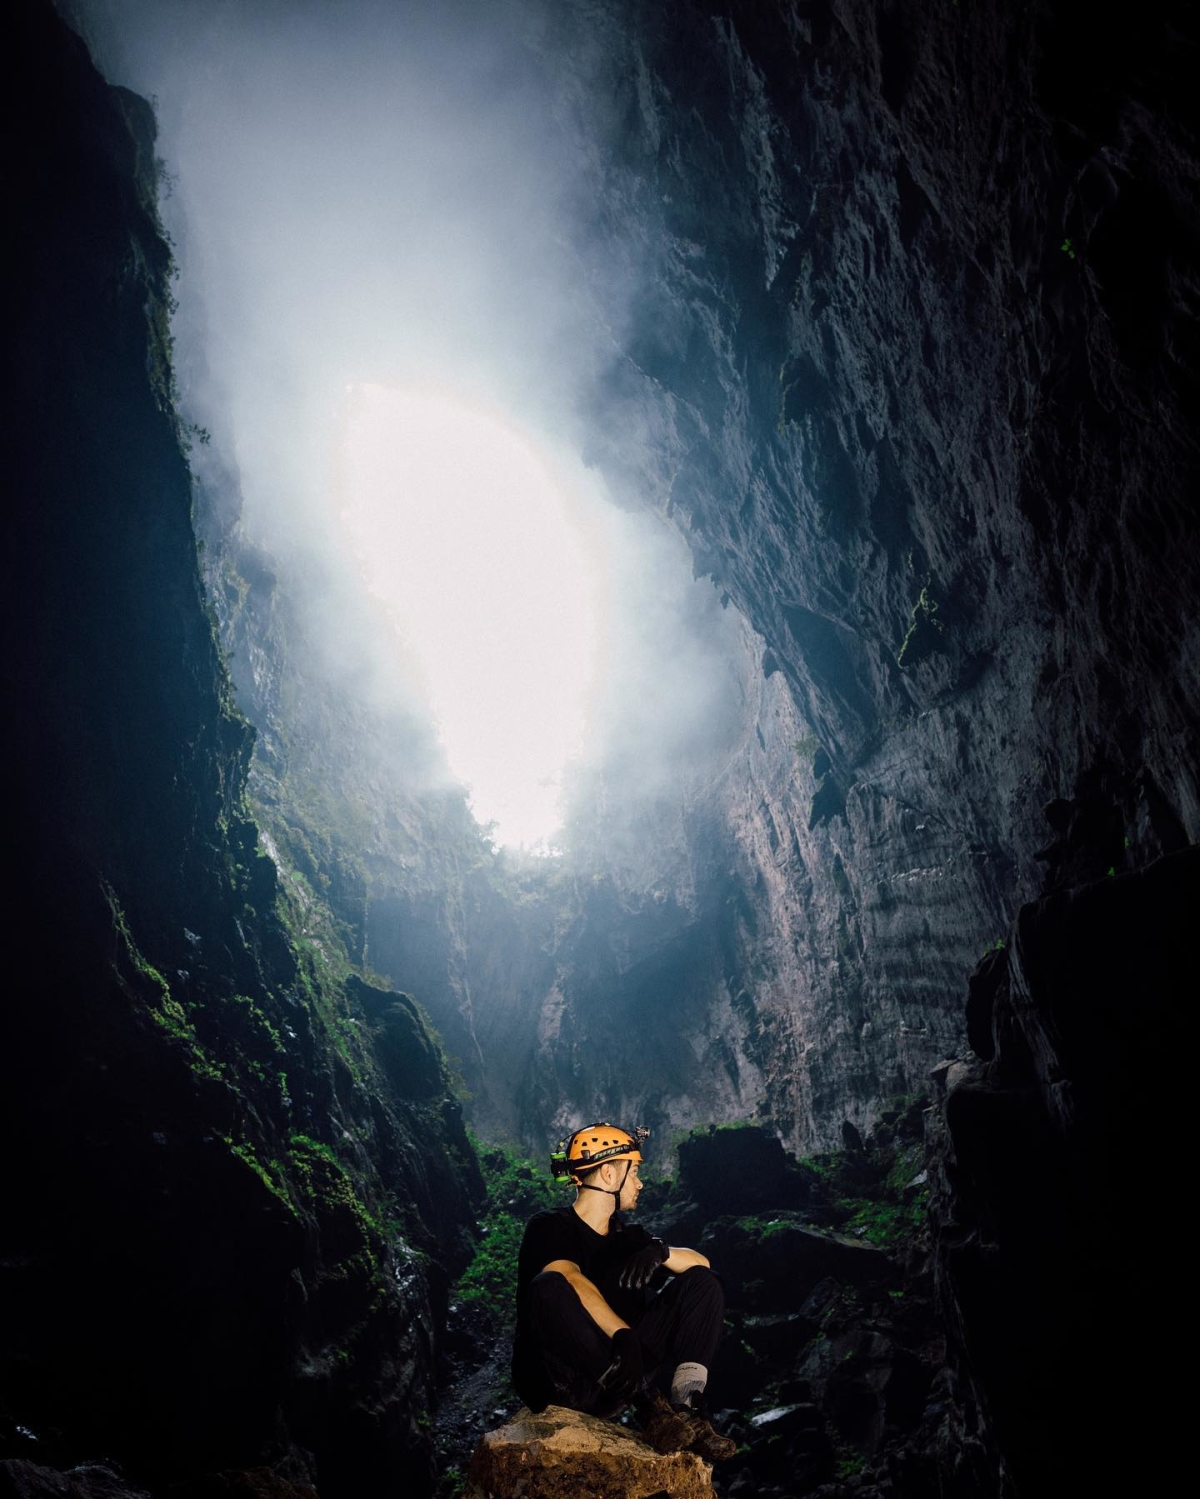 Four-day expedition of DJ Martin Garrix inside world's largest cave Son Doong